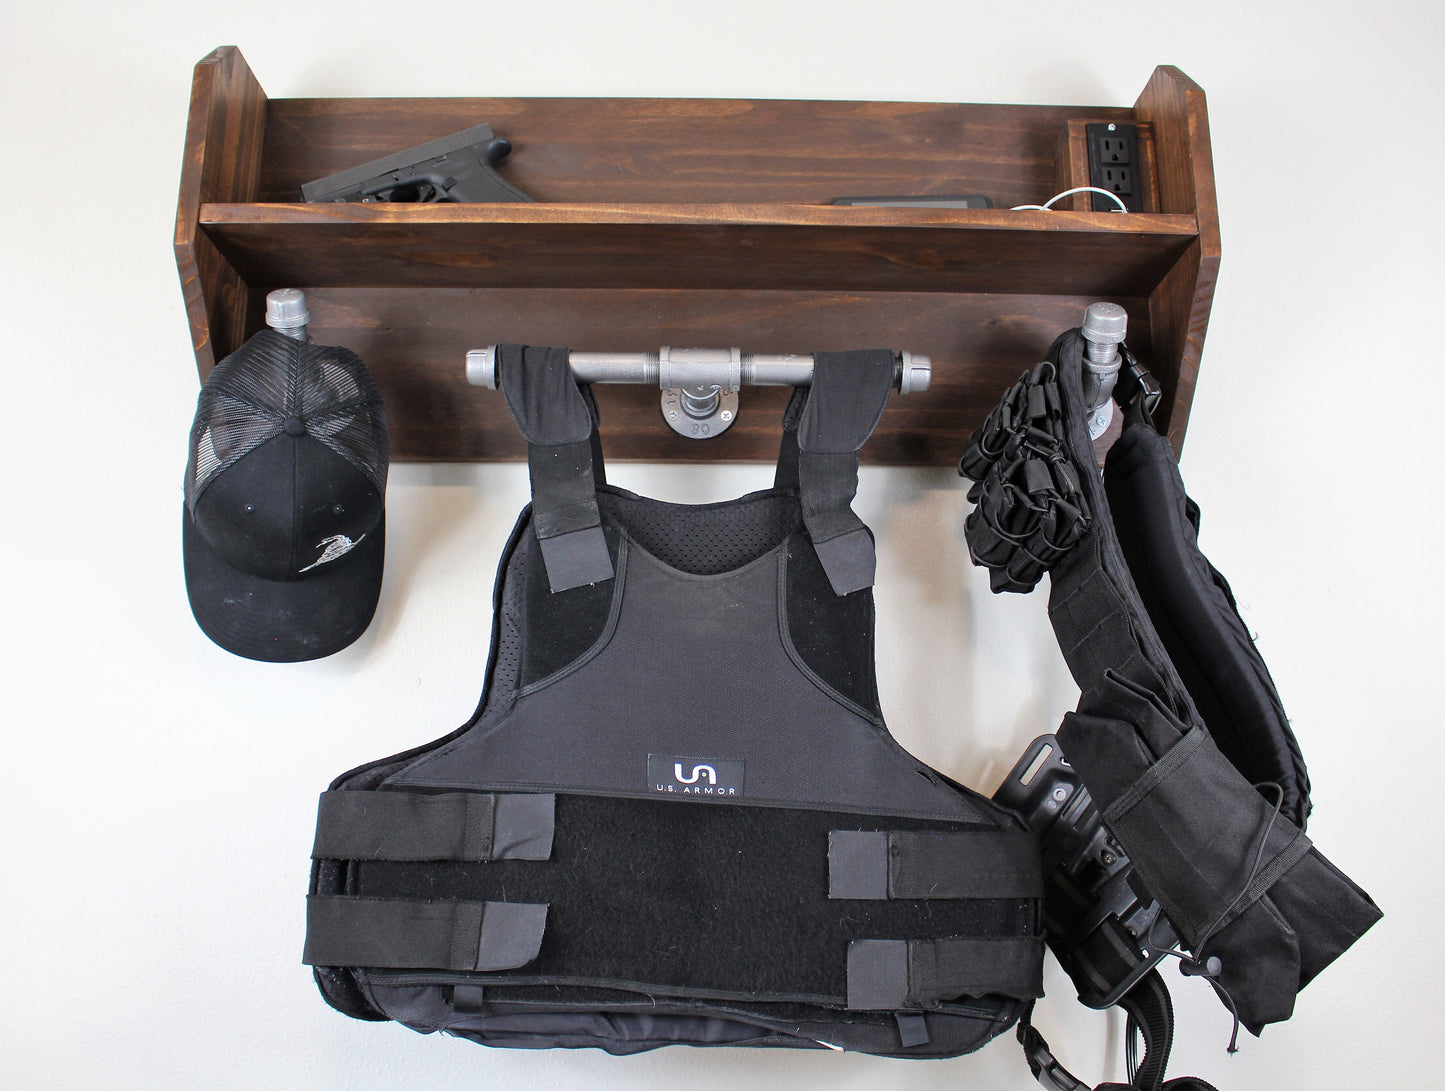  Wall Mount Hanger Holder Iron Tactical Gear For